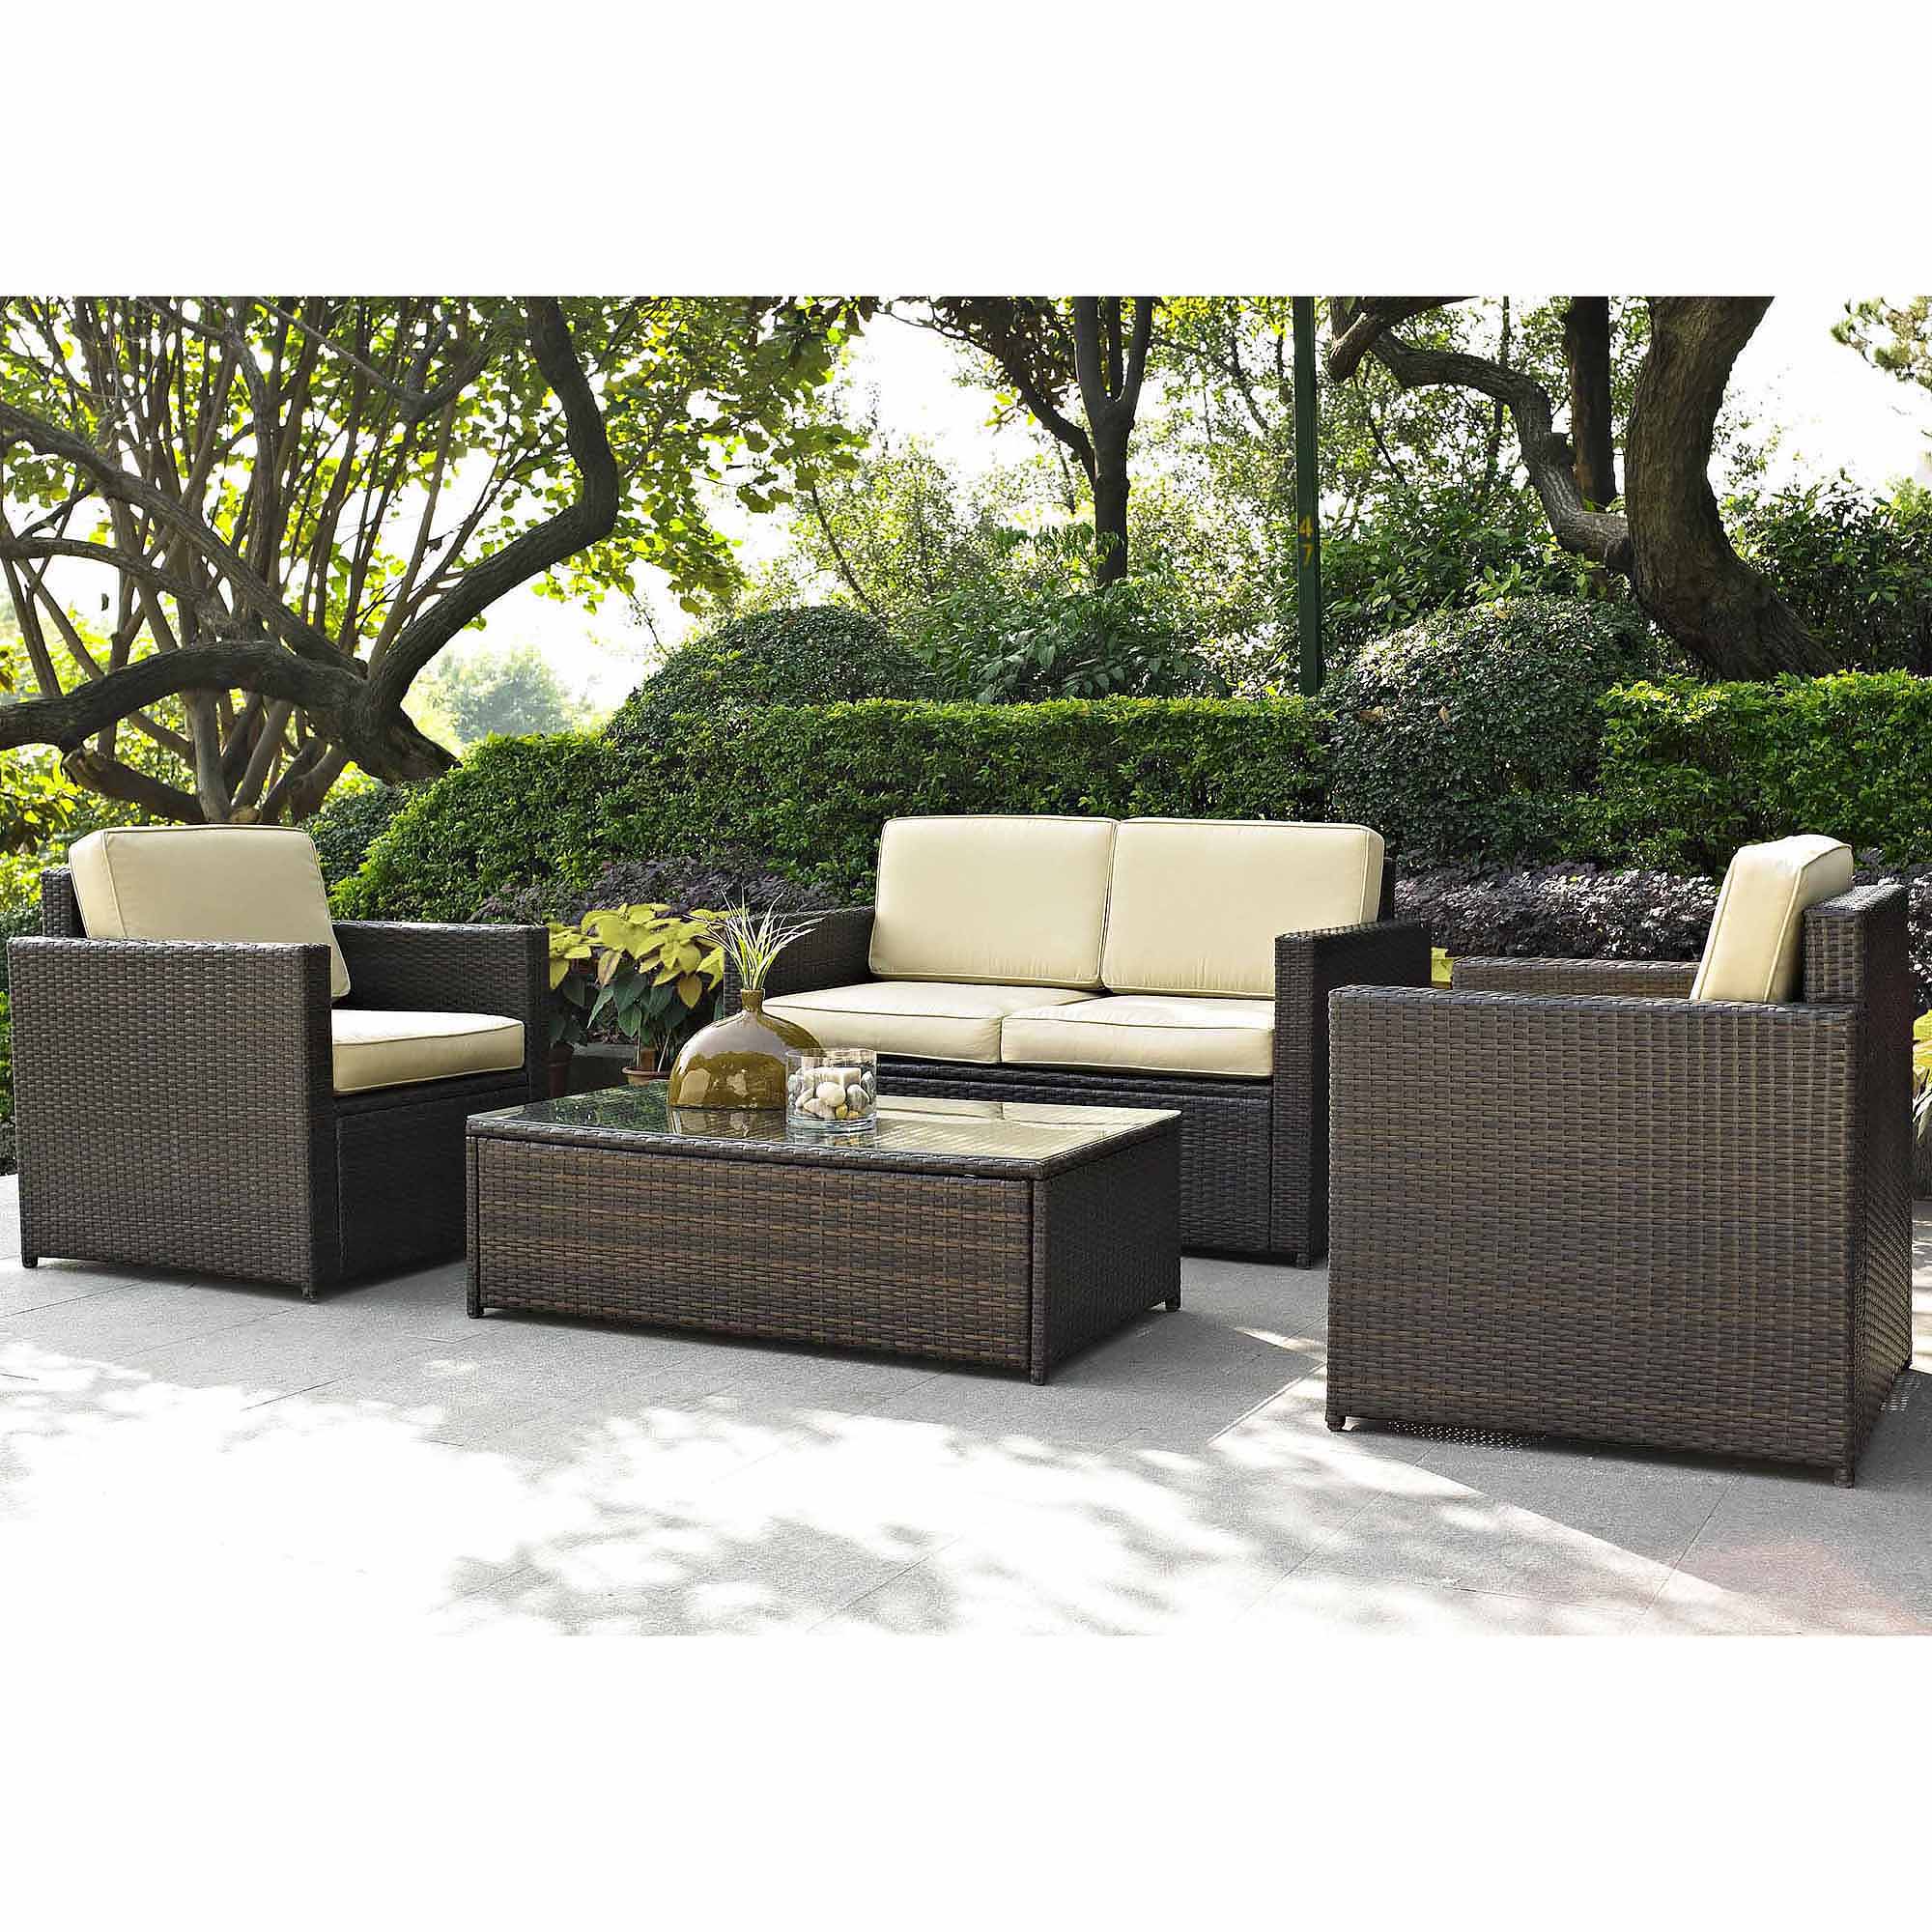 Beautiful Best Choice Products Outdoor Garden Patio 4pc Cushioned Seat Black Wicker  Sofa outdoor wicker furniture